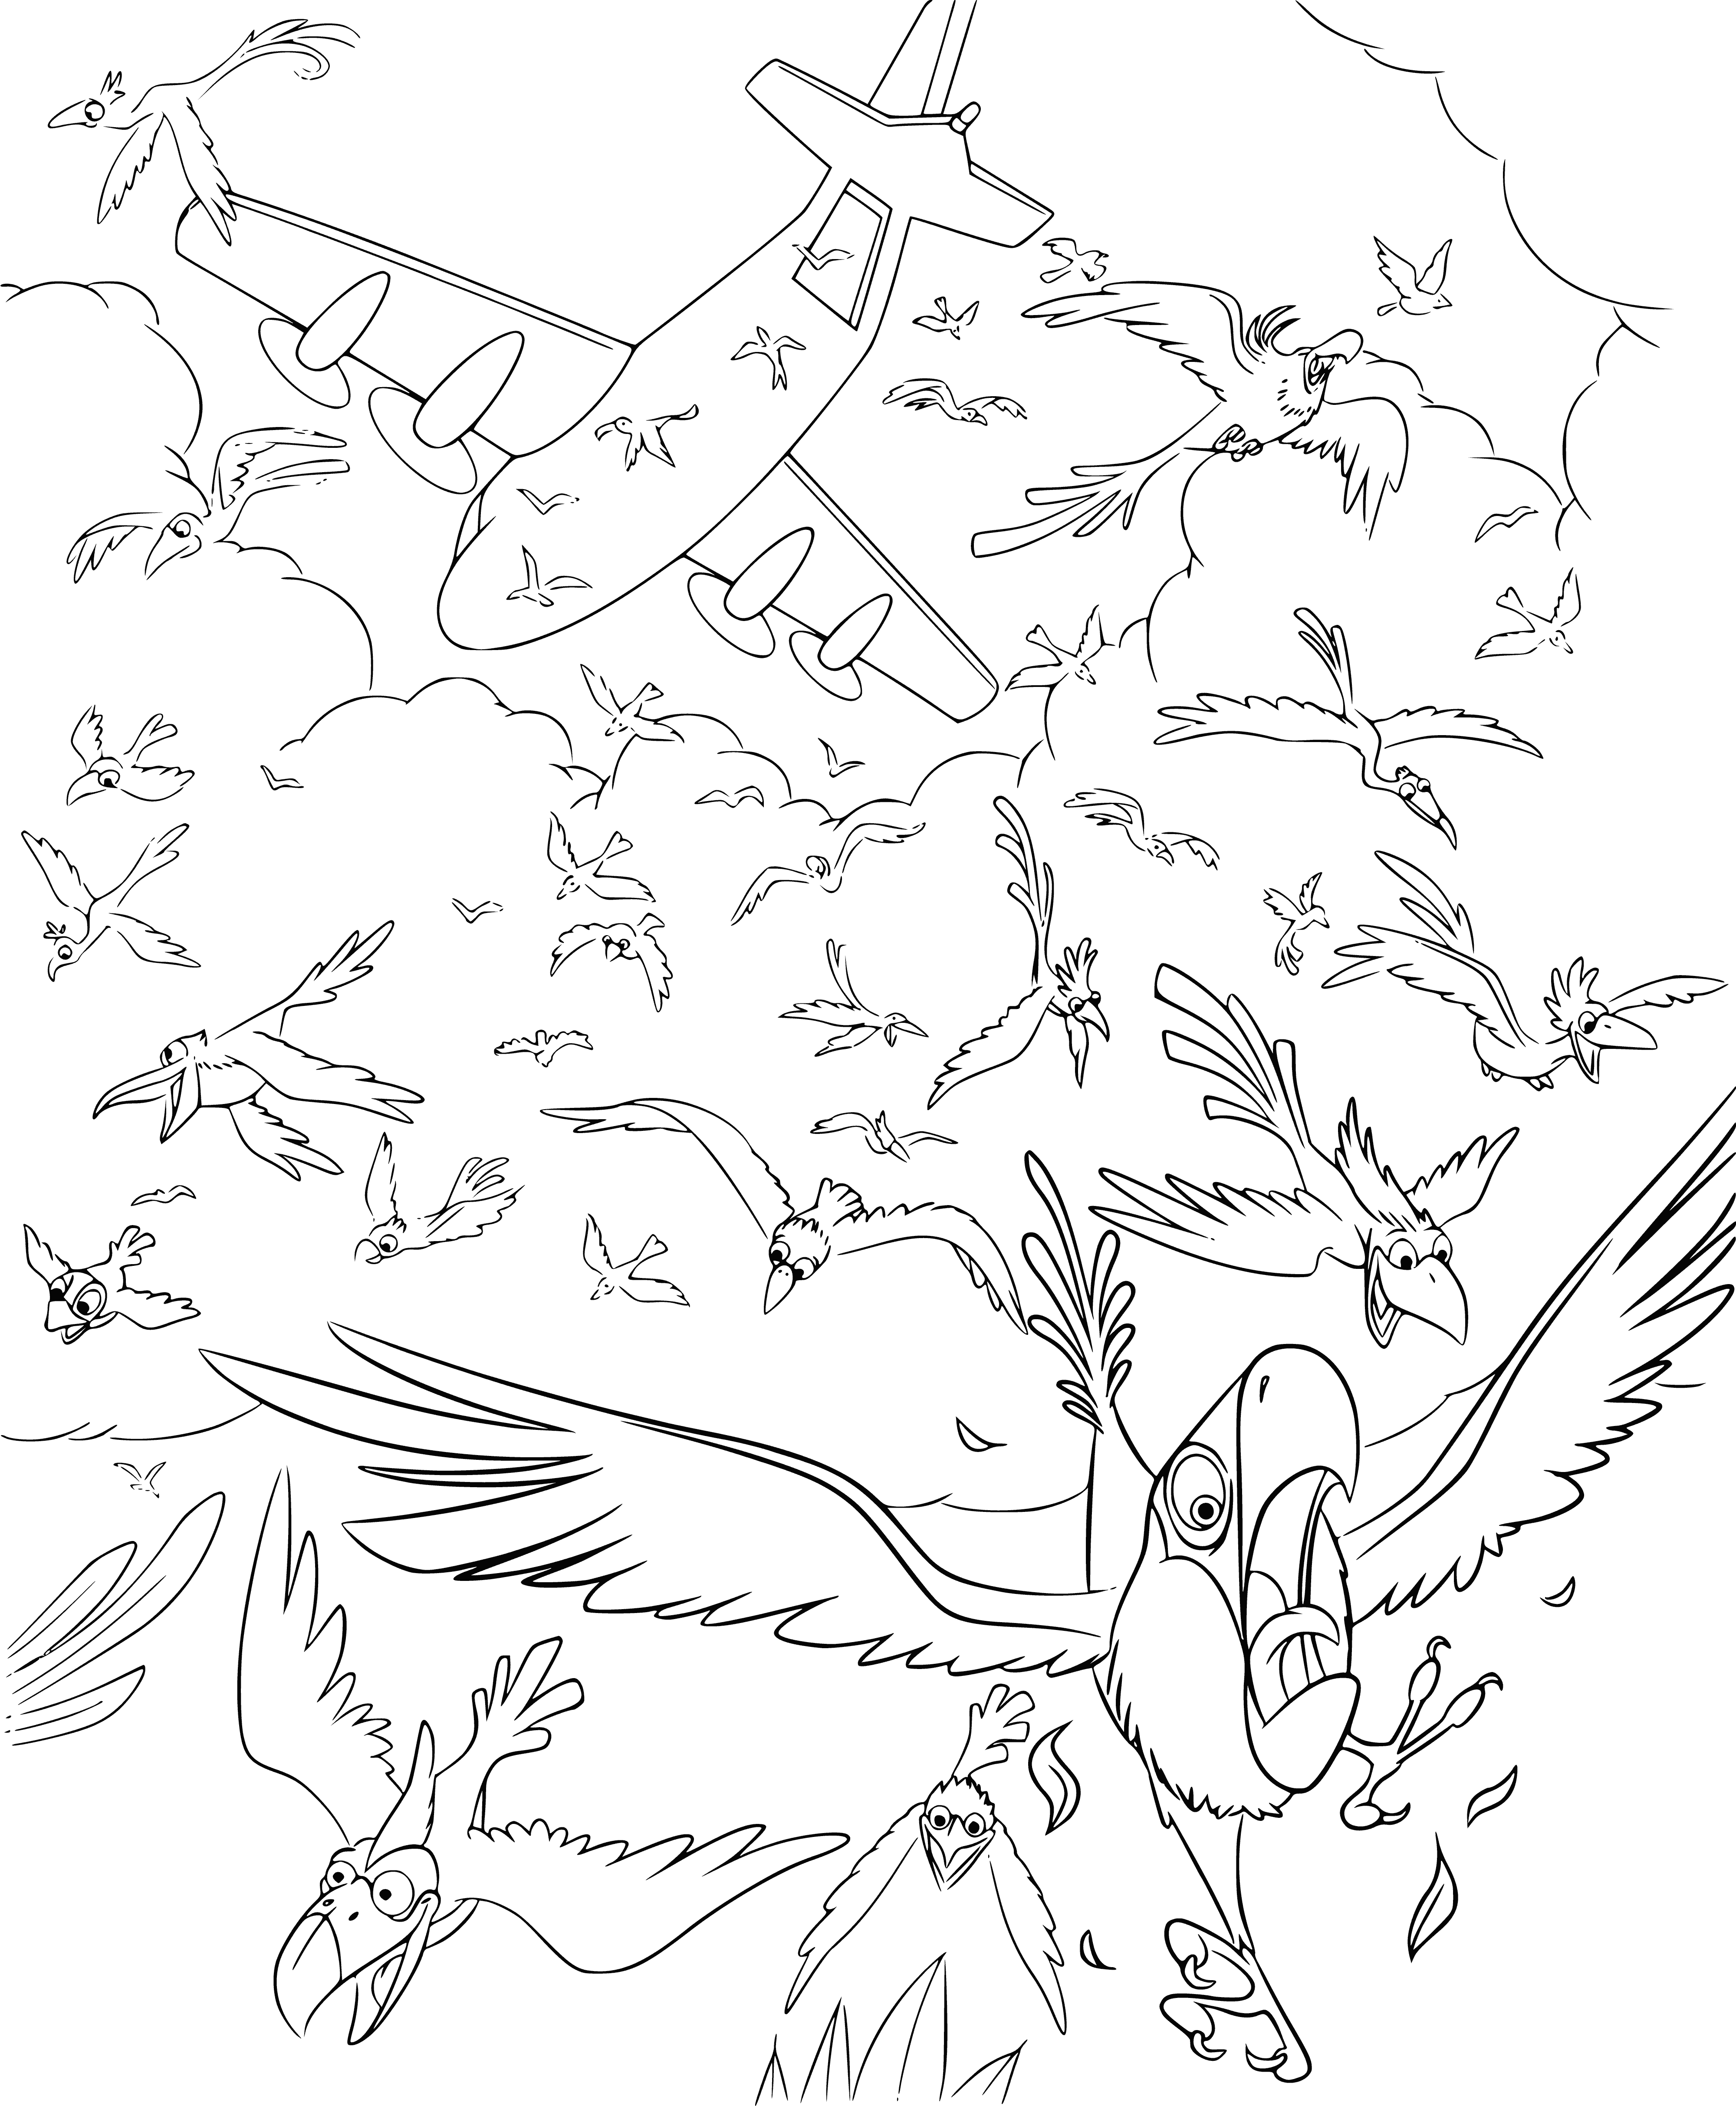 coloring page: Rio is a vibrant city in Brazil w/tall buildings, trees & parks, sceneries & riverside views. The Rio de Janeiro river flows through it.